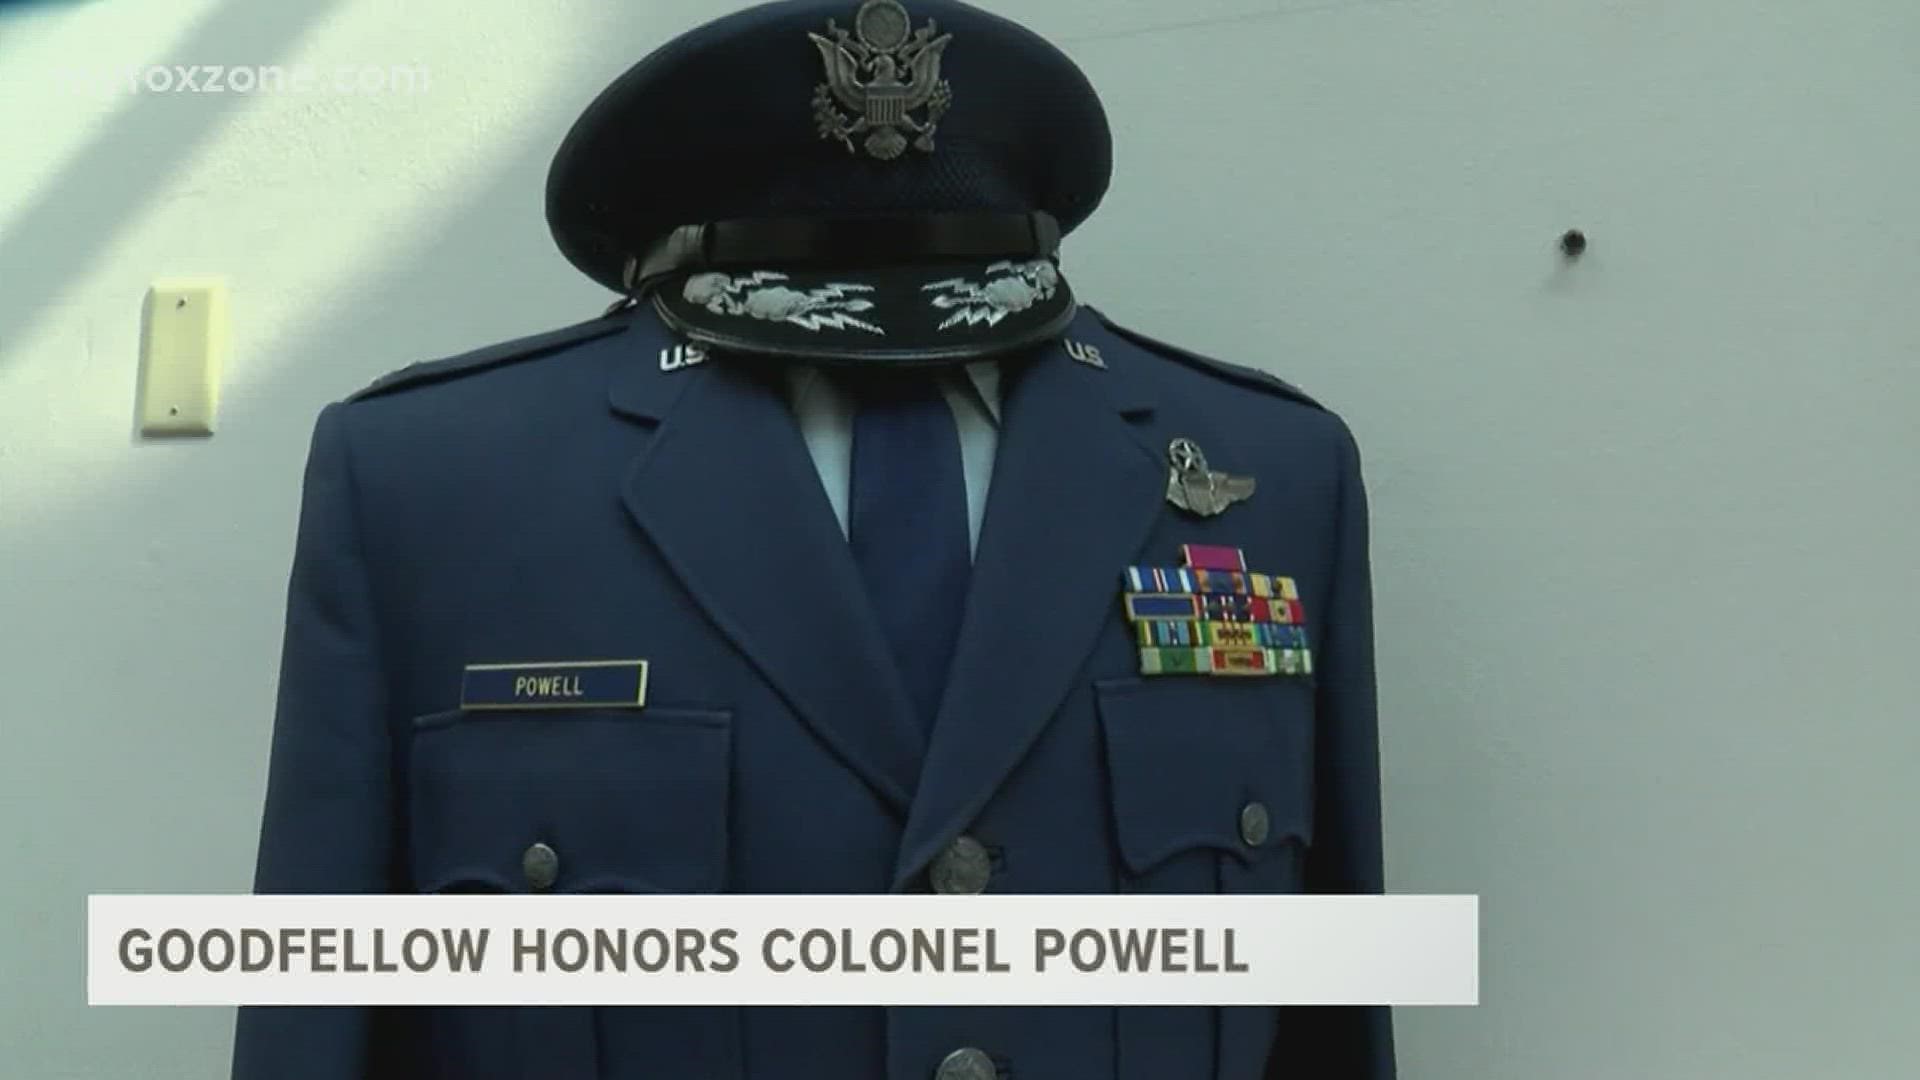 Goodfellow honors Colonel Powell